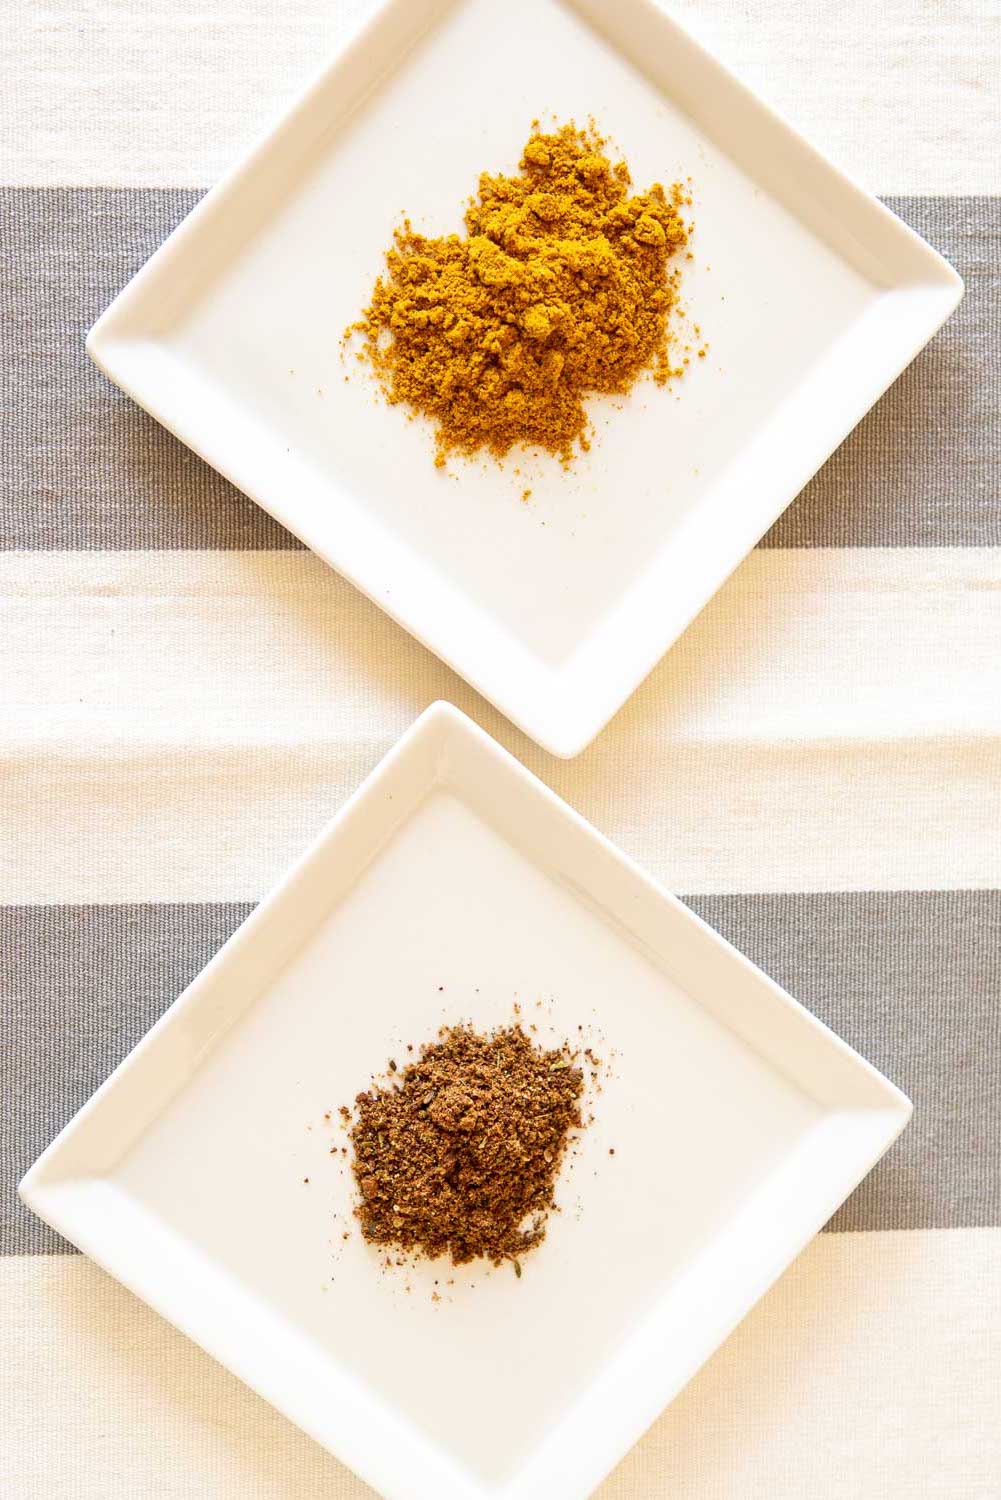 Curry powder vs garam masala – what’s the difference?